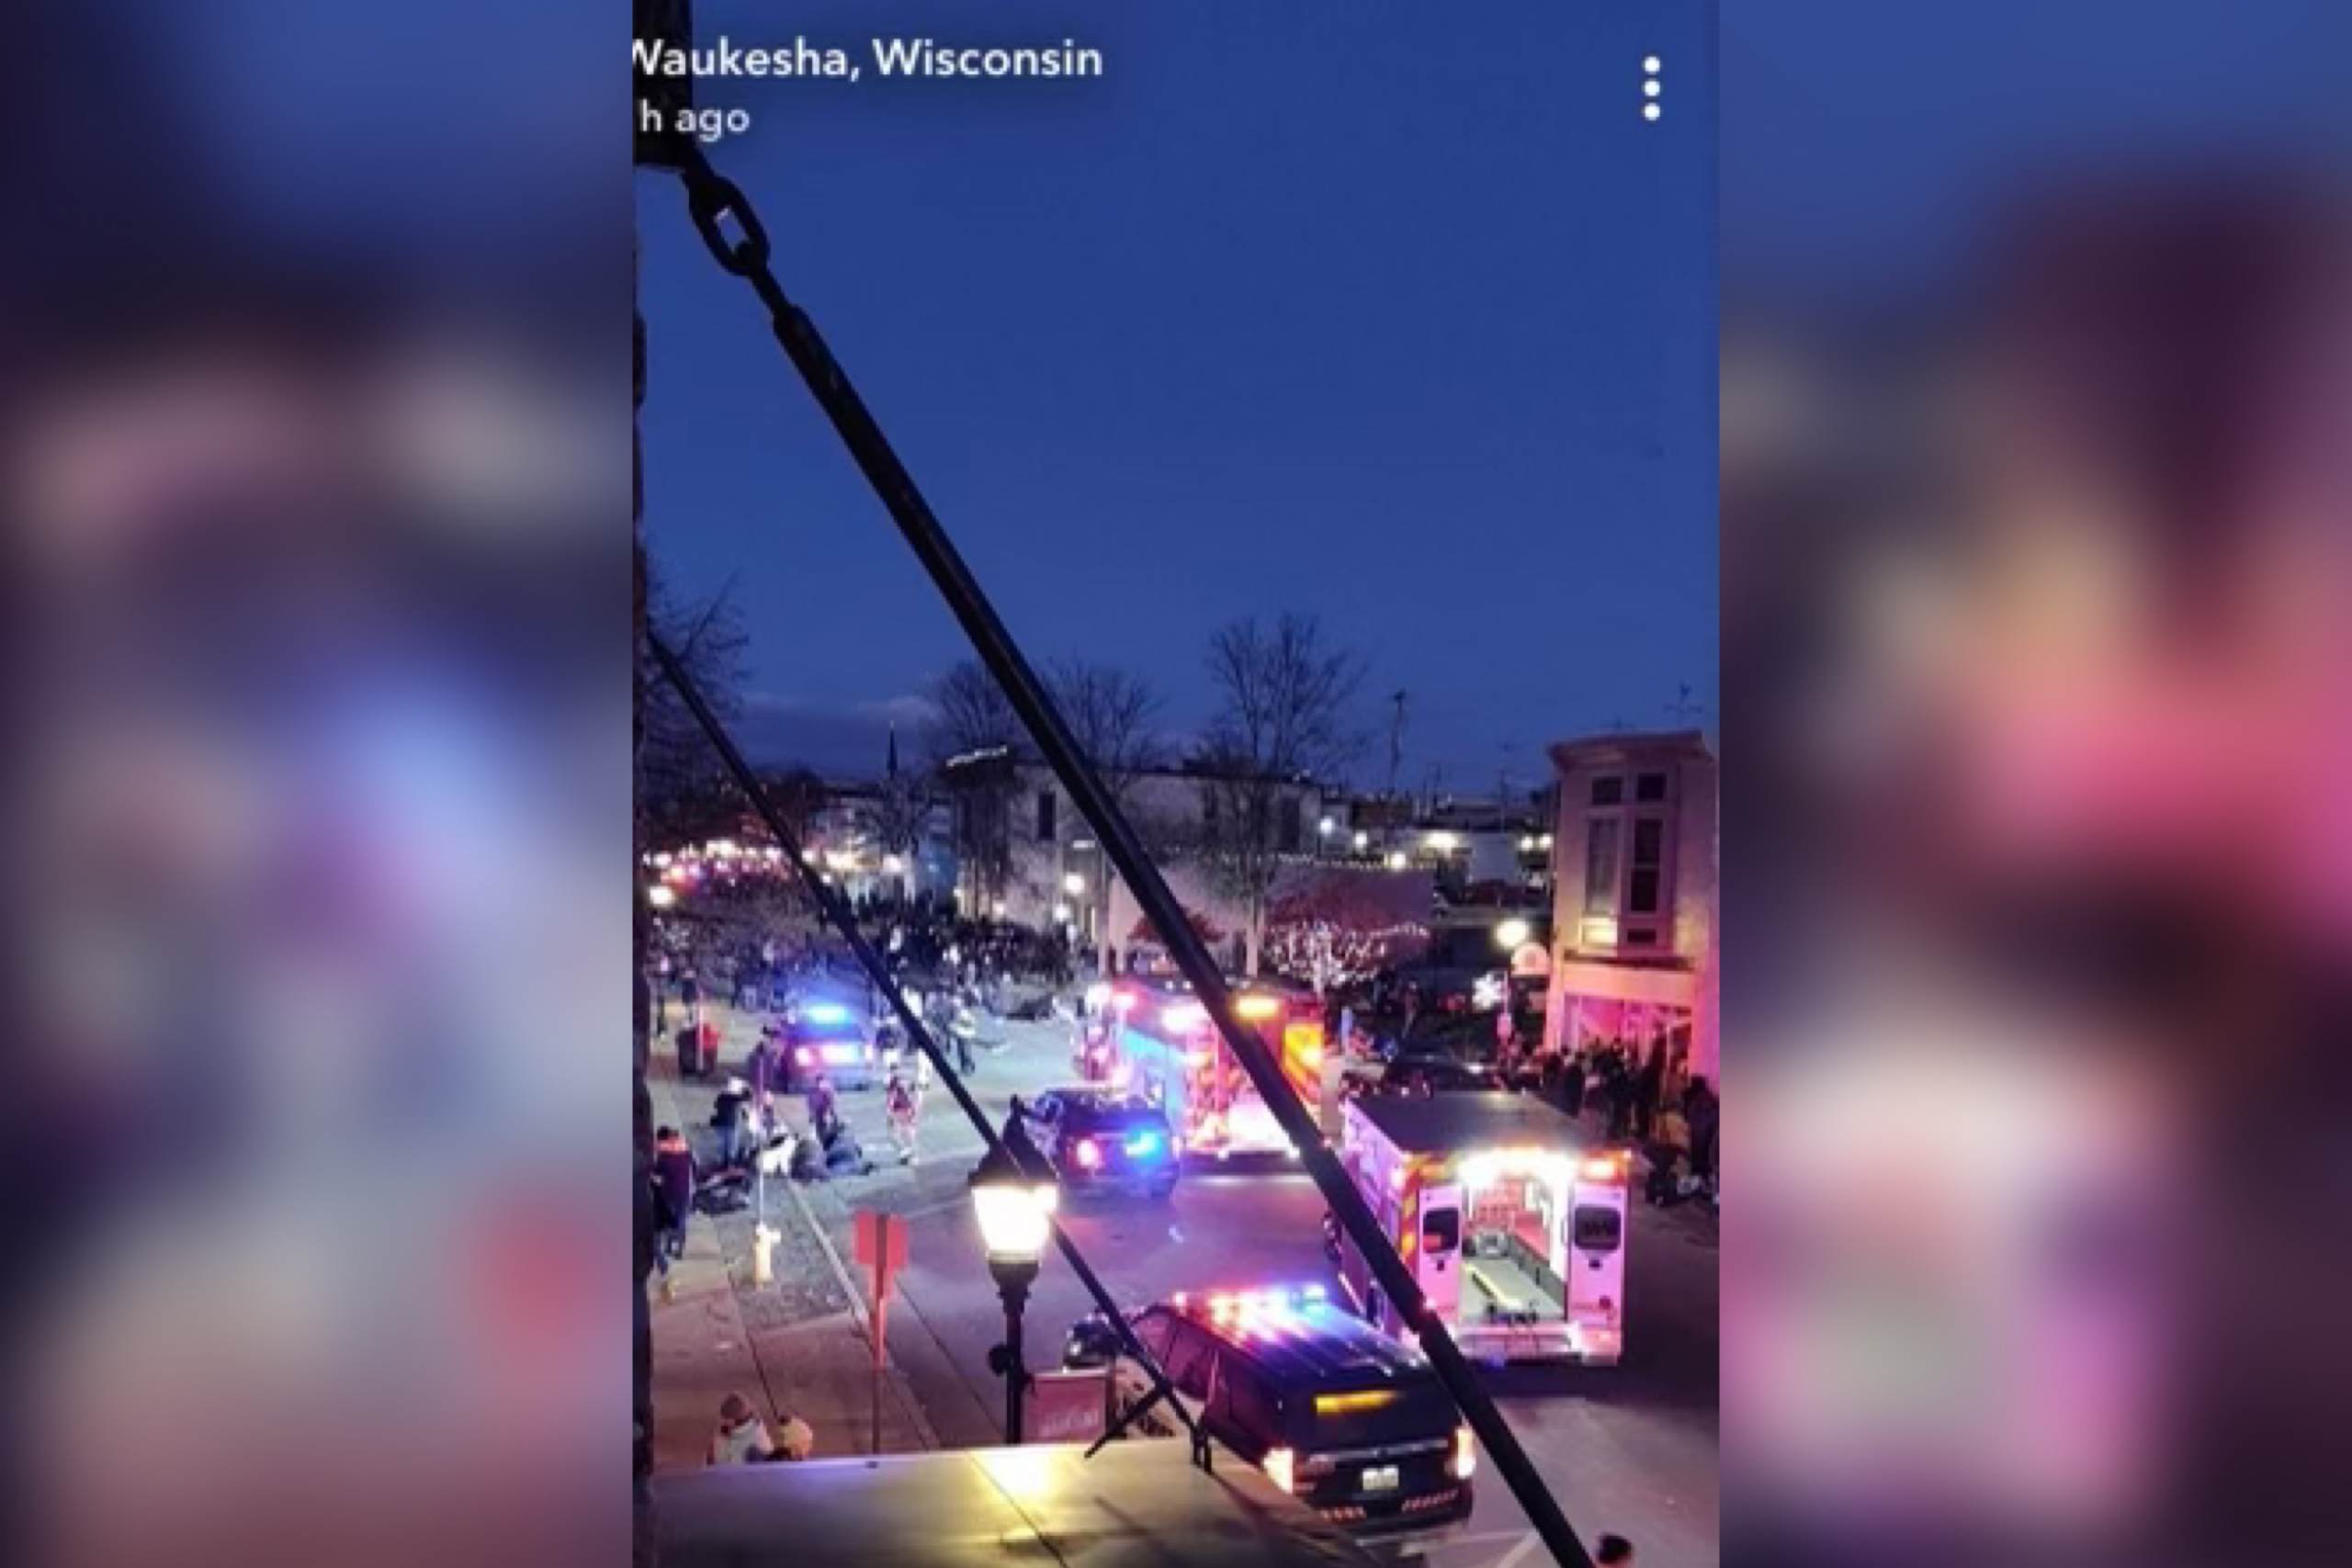  Person of Interest Identified in Waukesha Christmas Parade Attack — Car Spotted in Nearby Driveway — Shelter in Place Warning Issued in Waukesha